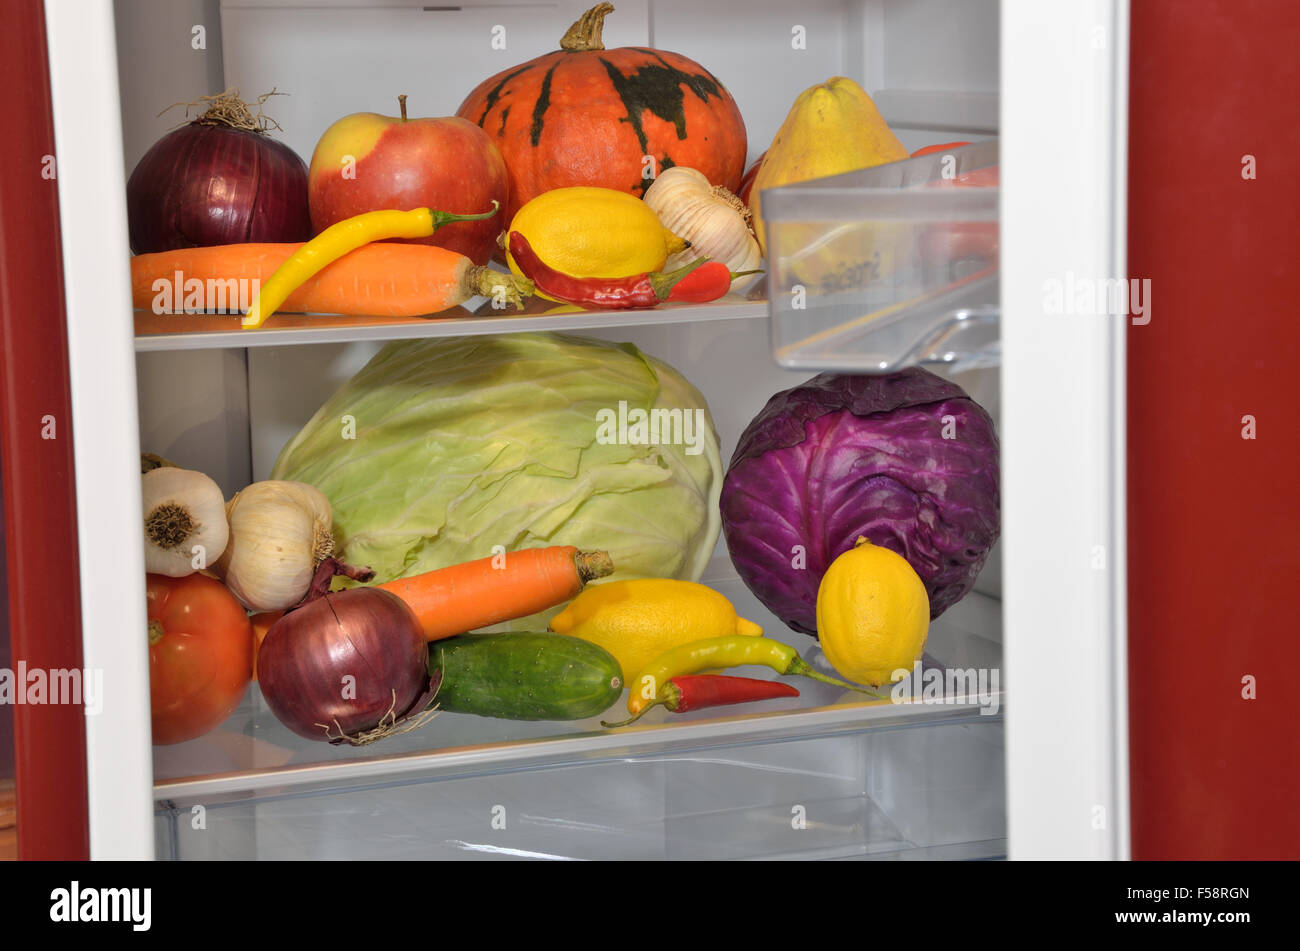 Fresh fruits and vegetables on shelves of half-opened refrigerator Stock Photo